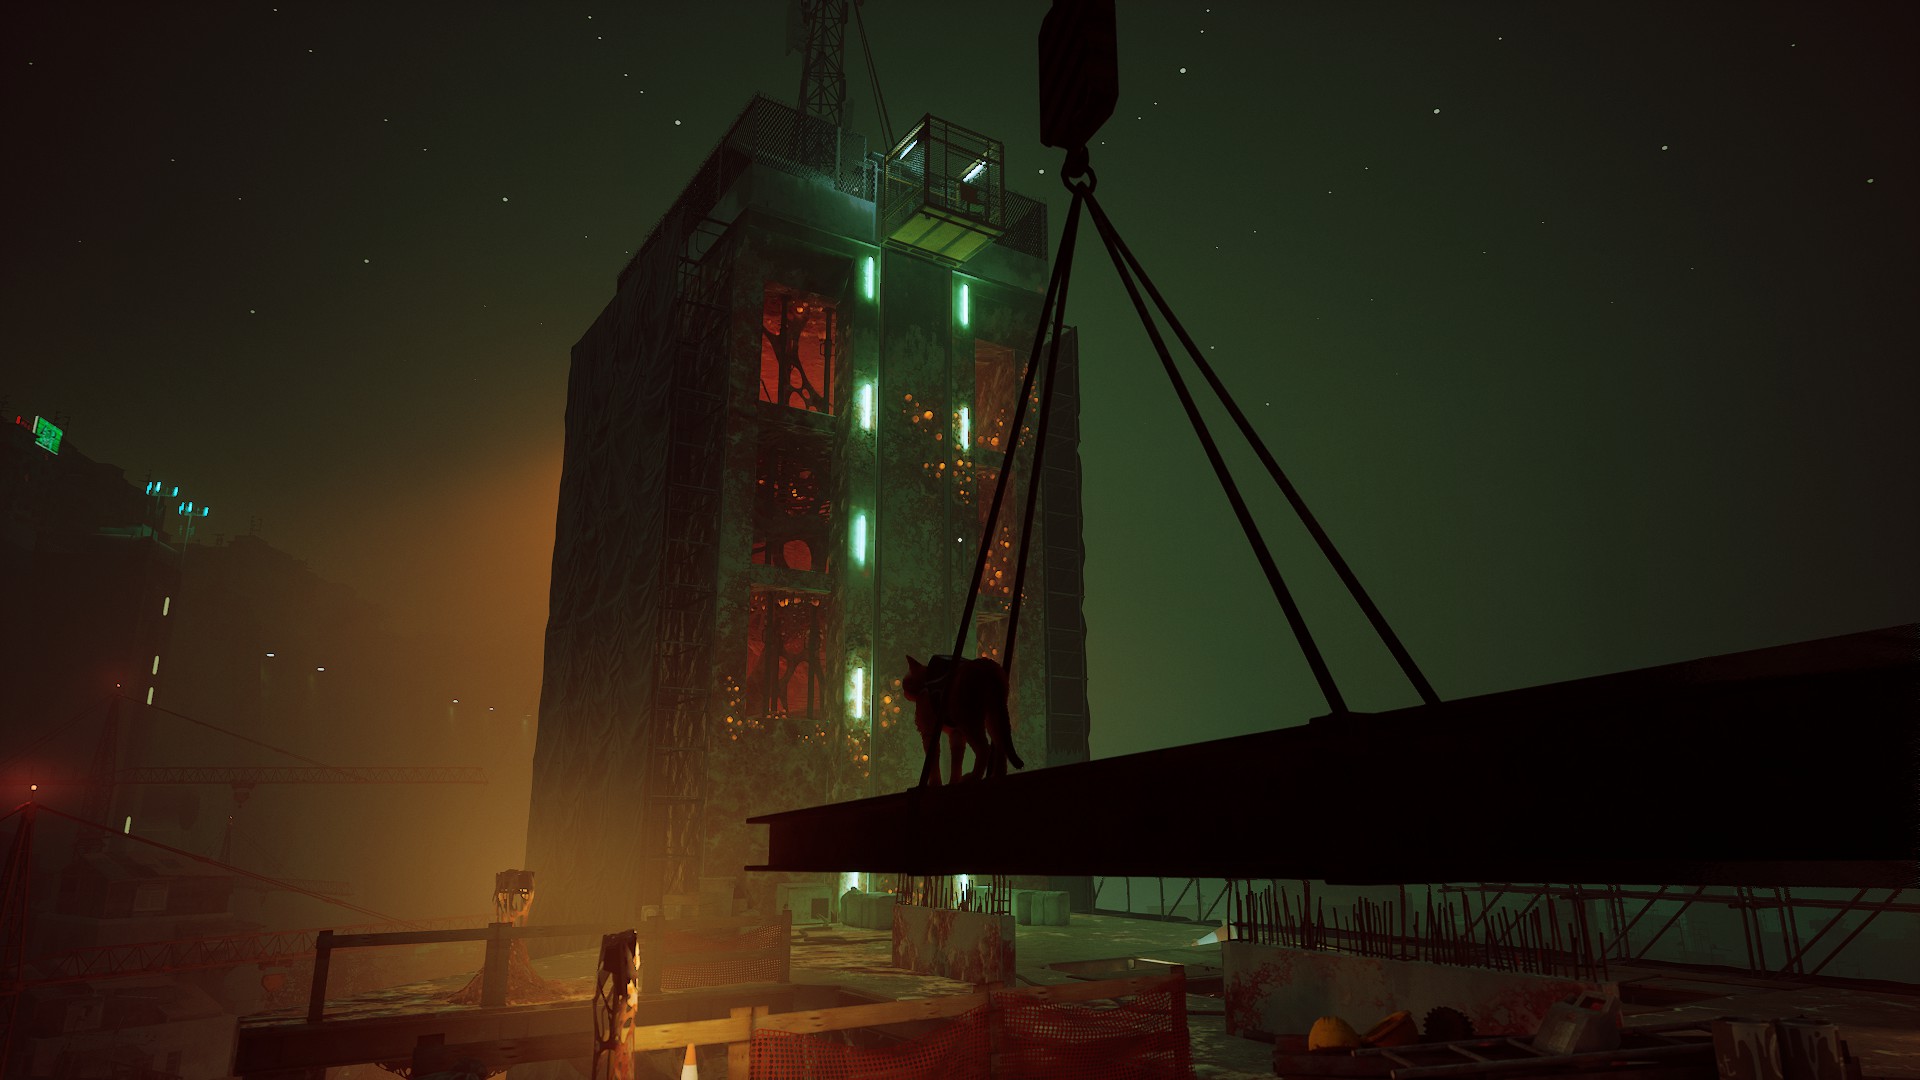 Cat approaching a tall building at night, which seems infested by creepy organic material that promises danger.